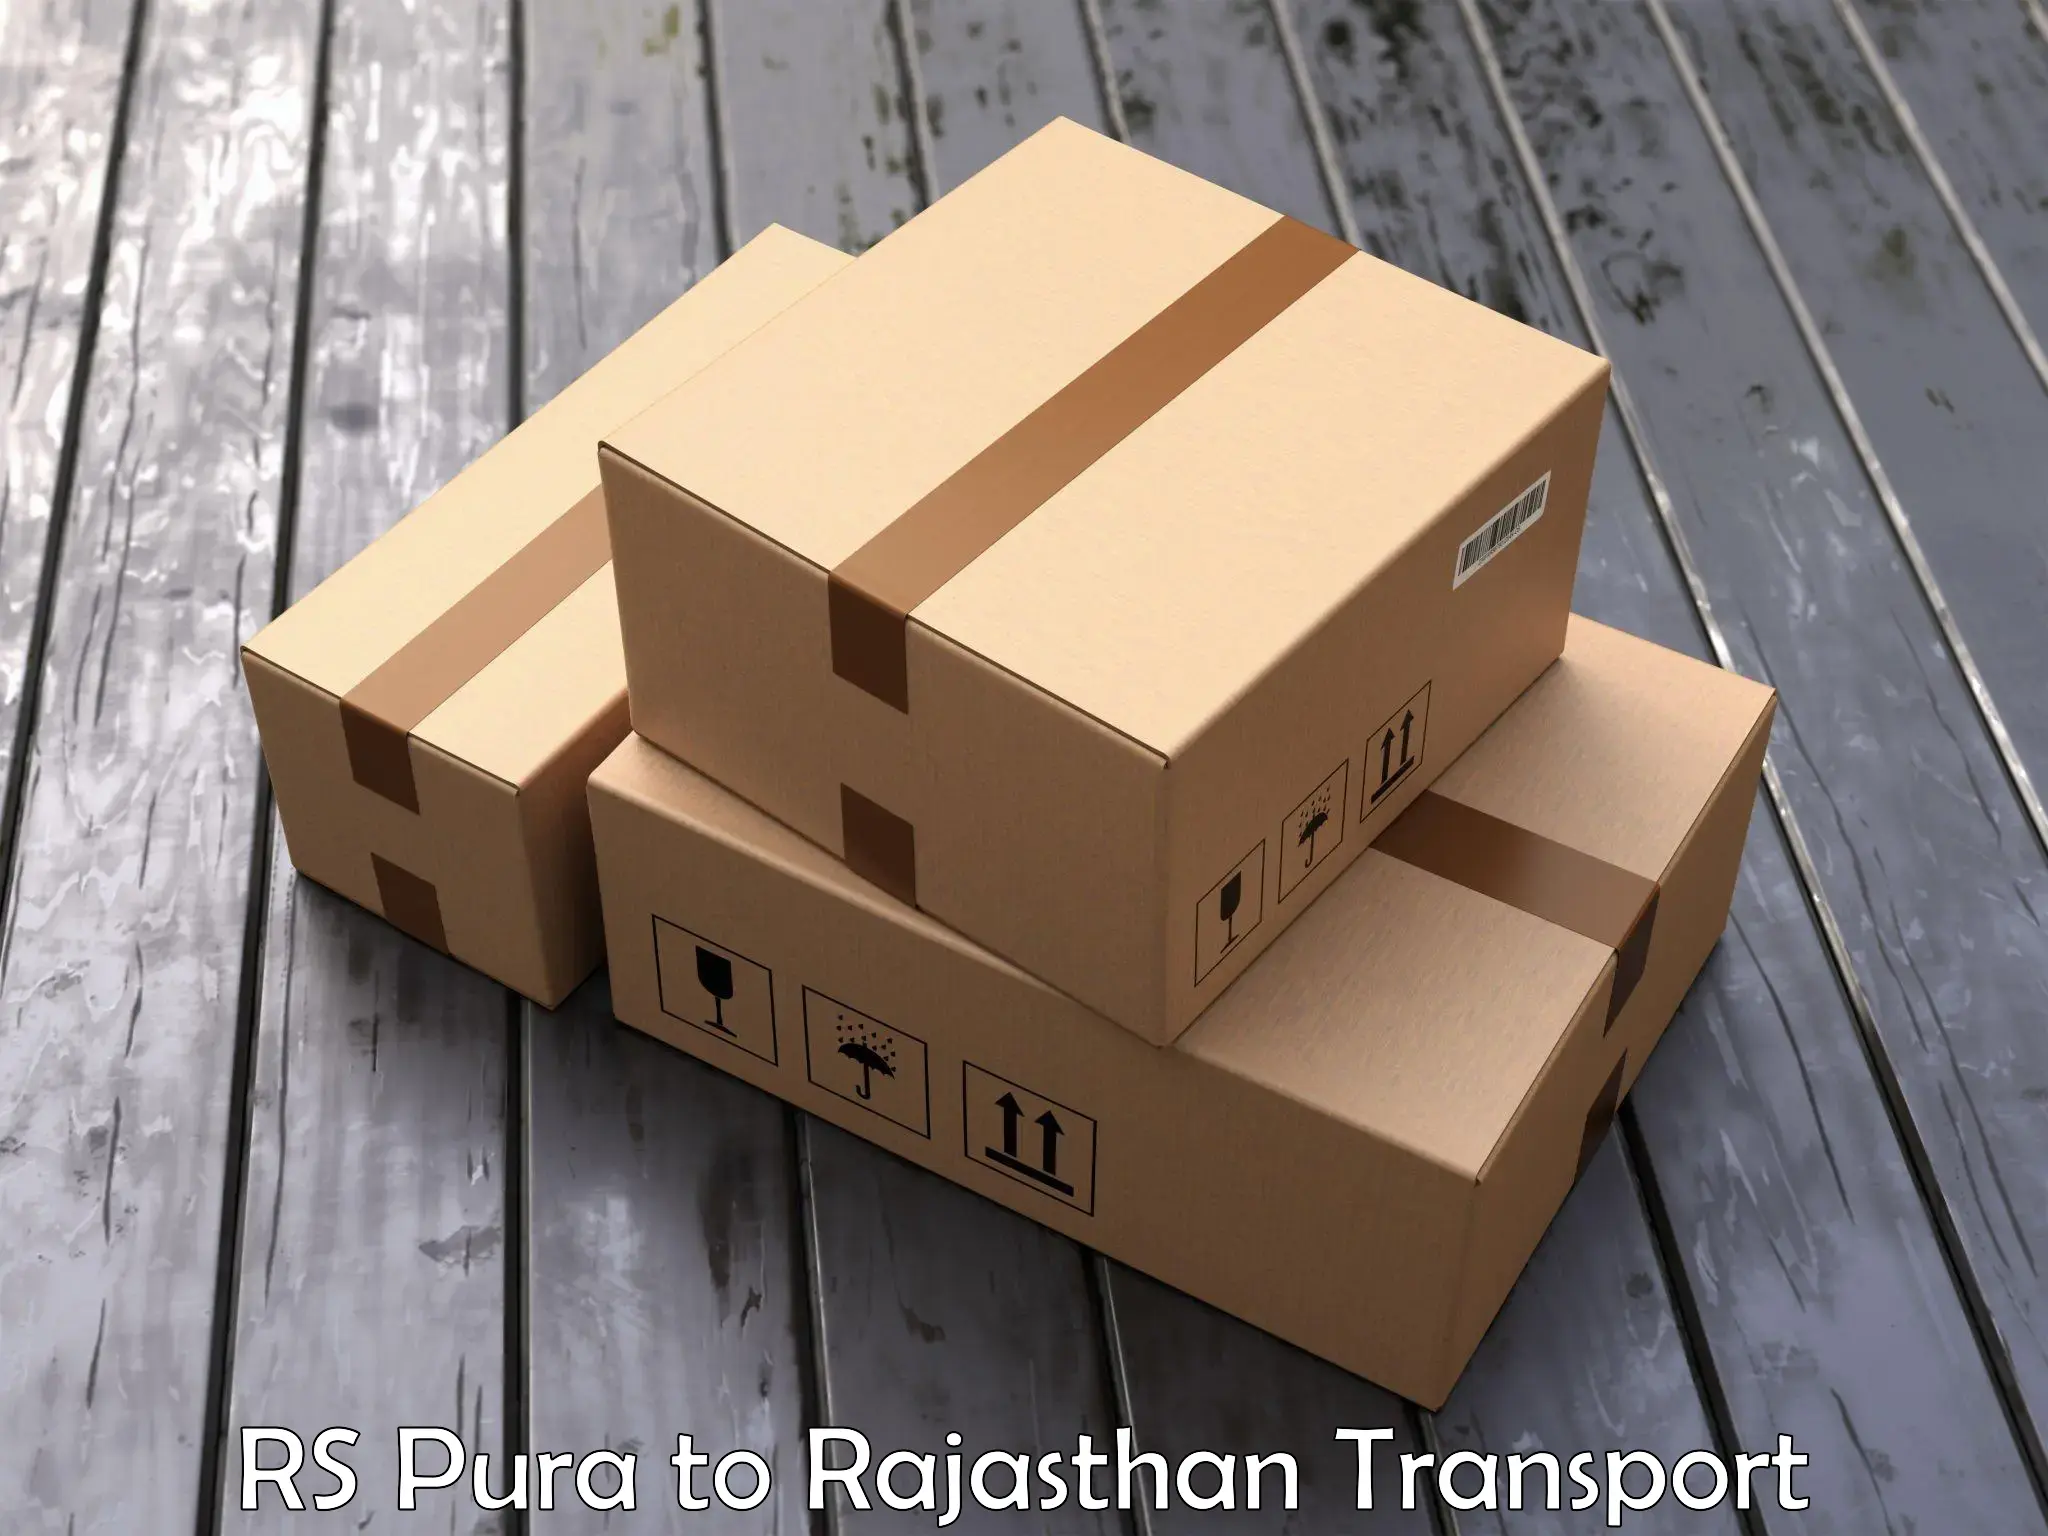 Transport in sharing in RS Pura to Neem ka Thana